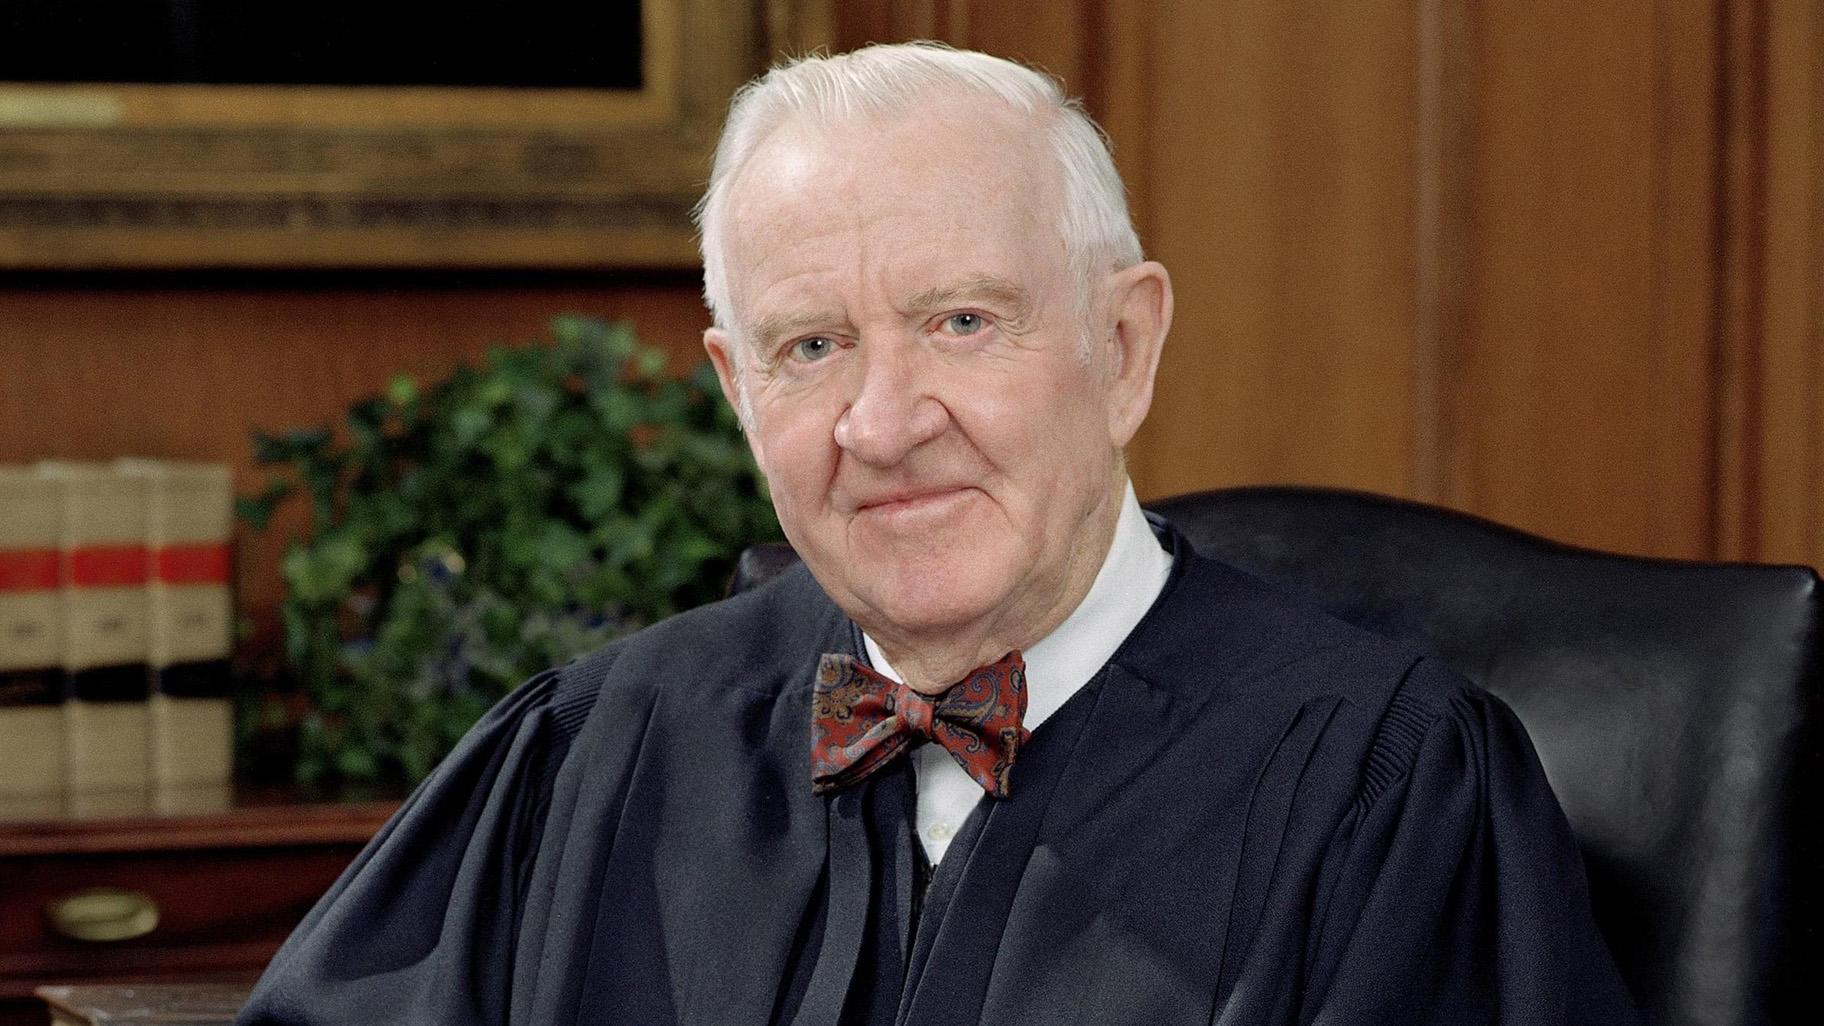 John Paul Stevens, U.S. Supreme Court justice. (Collection of the Supreme Court of the United States, Photographer: Steve Petteway)